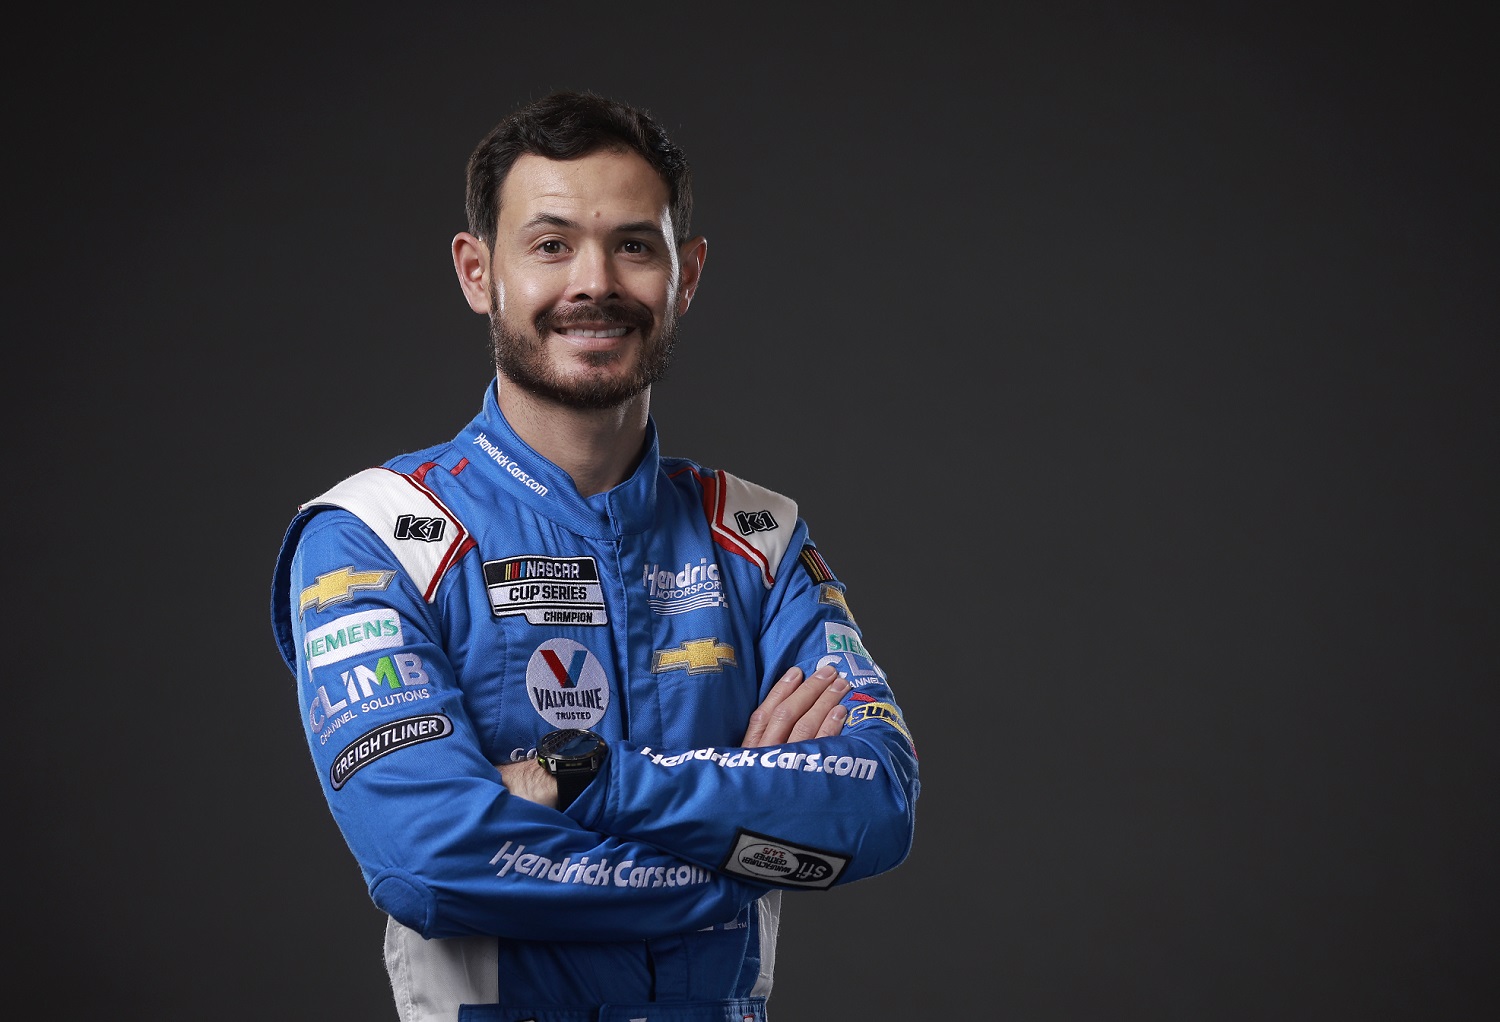 NASCAR driver Kyle Larson poses for a photo during NASCAR Production Days at Charlotte Convention Center on Jan. 17, 2023.